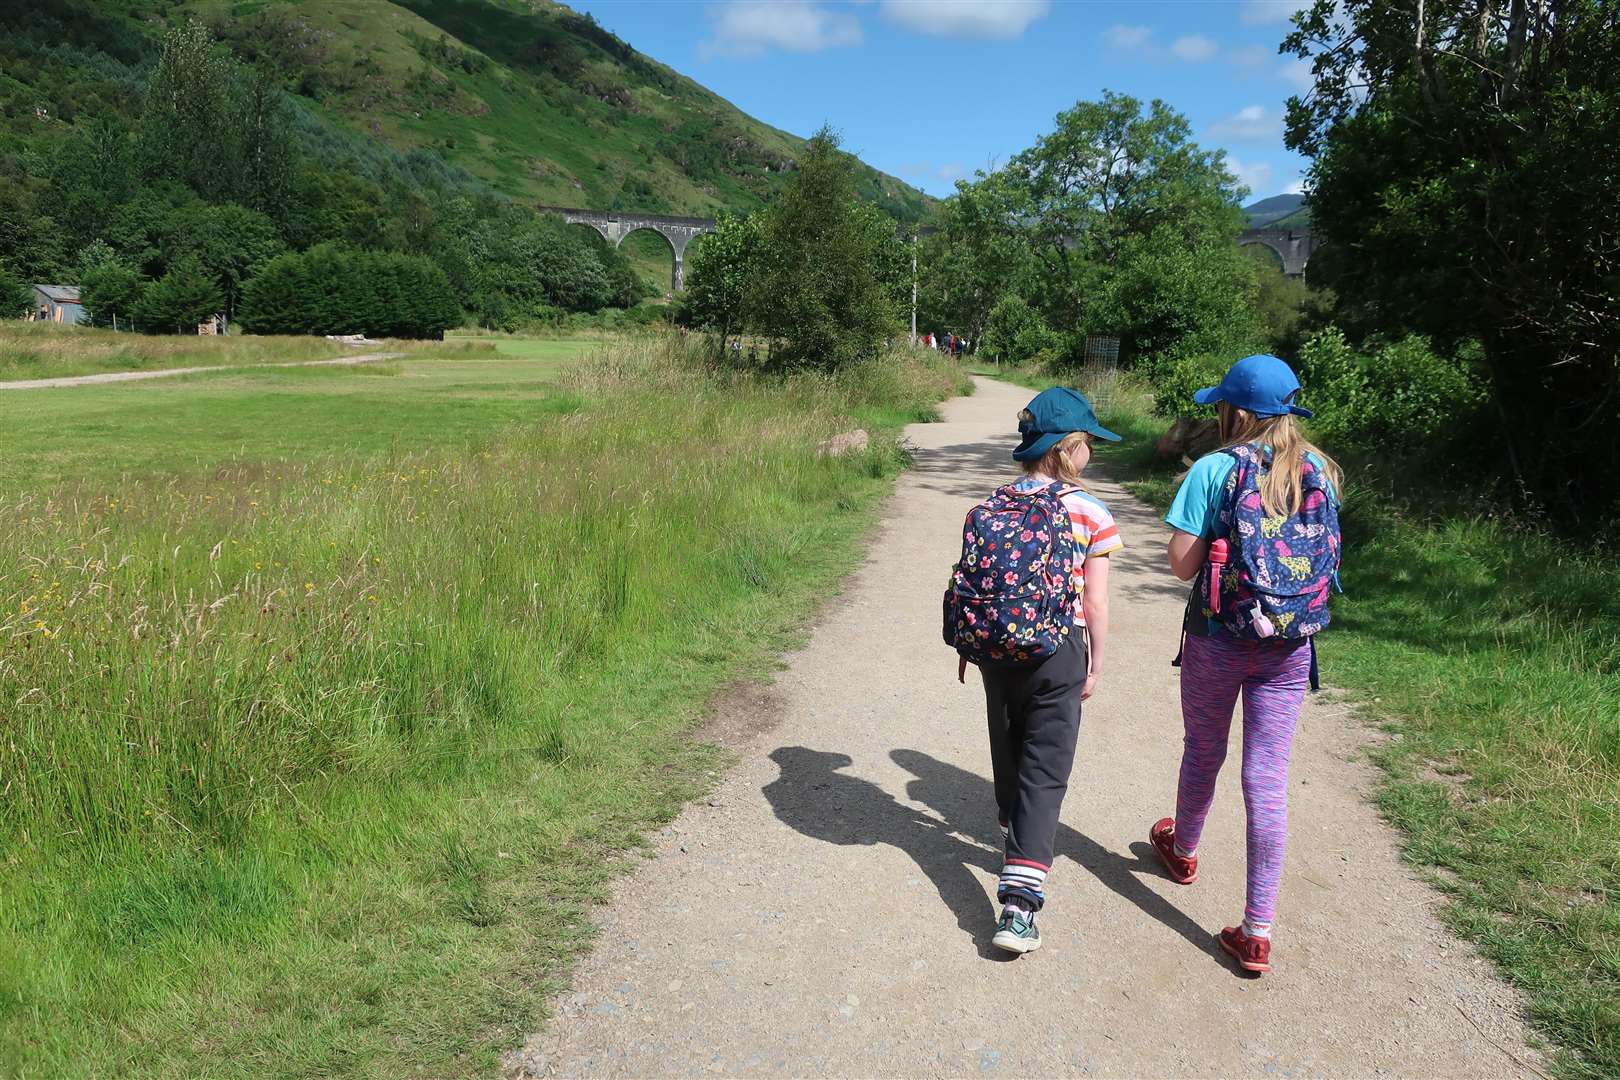 The girls make their way along the path towards the viaduct.